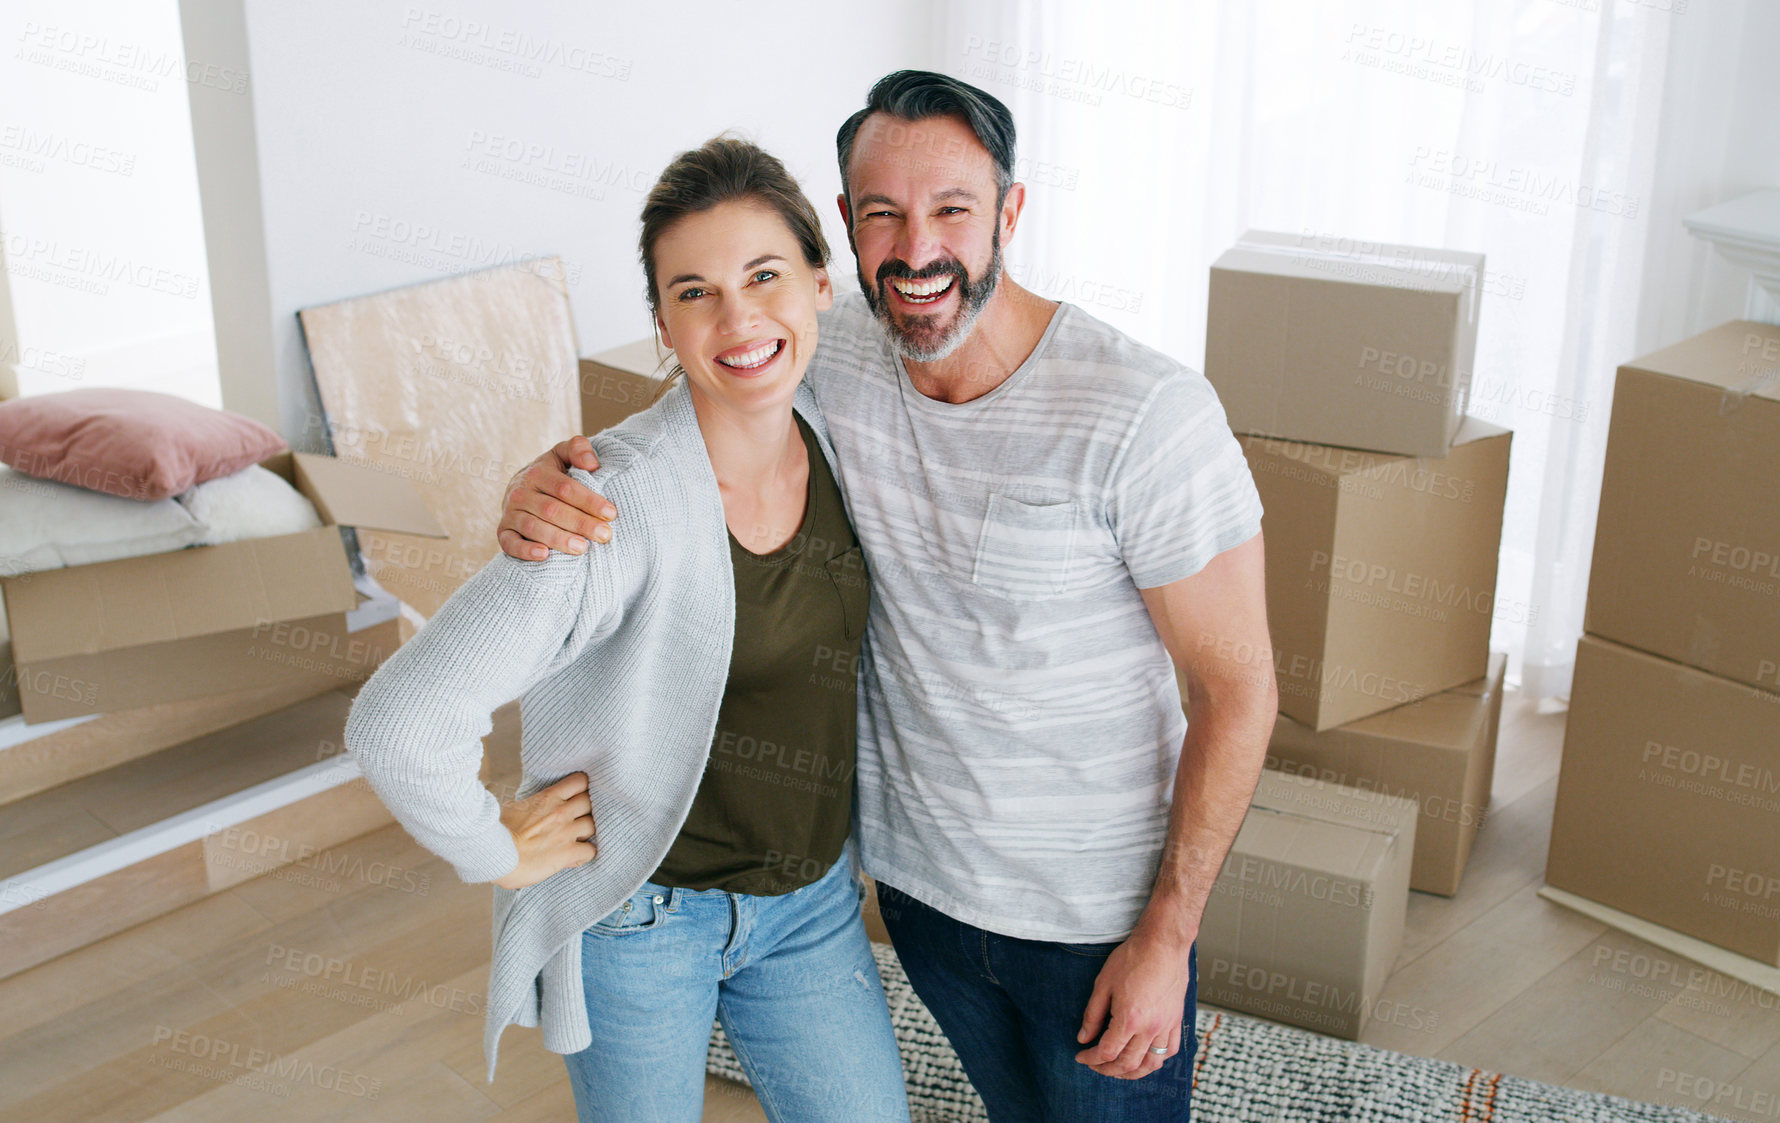 Buy stock photo Cropped shot of a middle aged couple moving into their new home